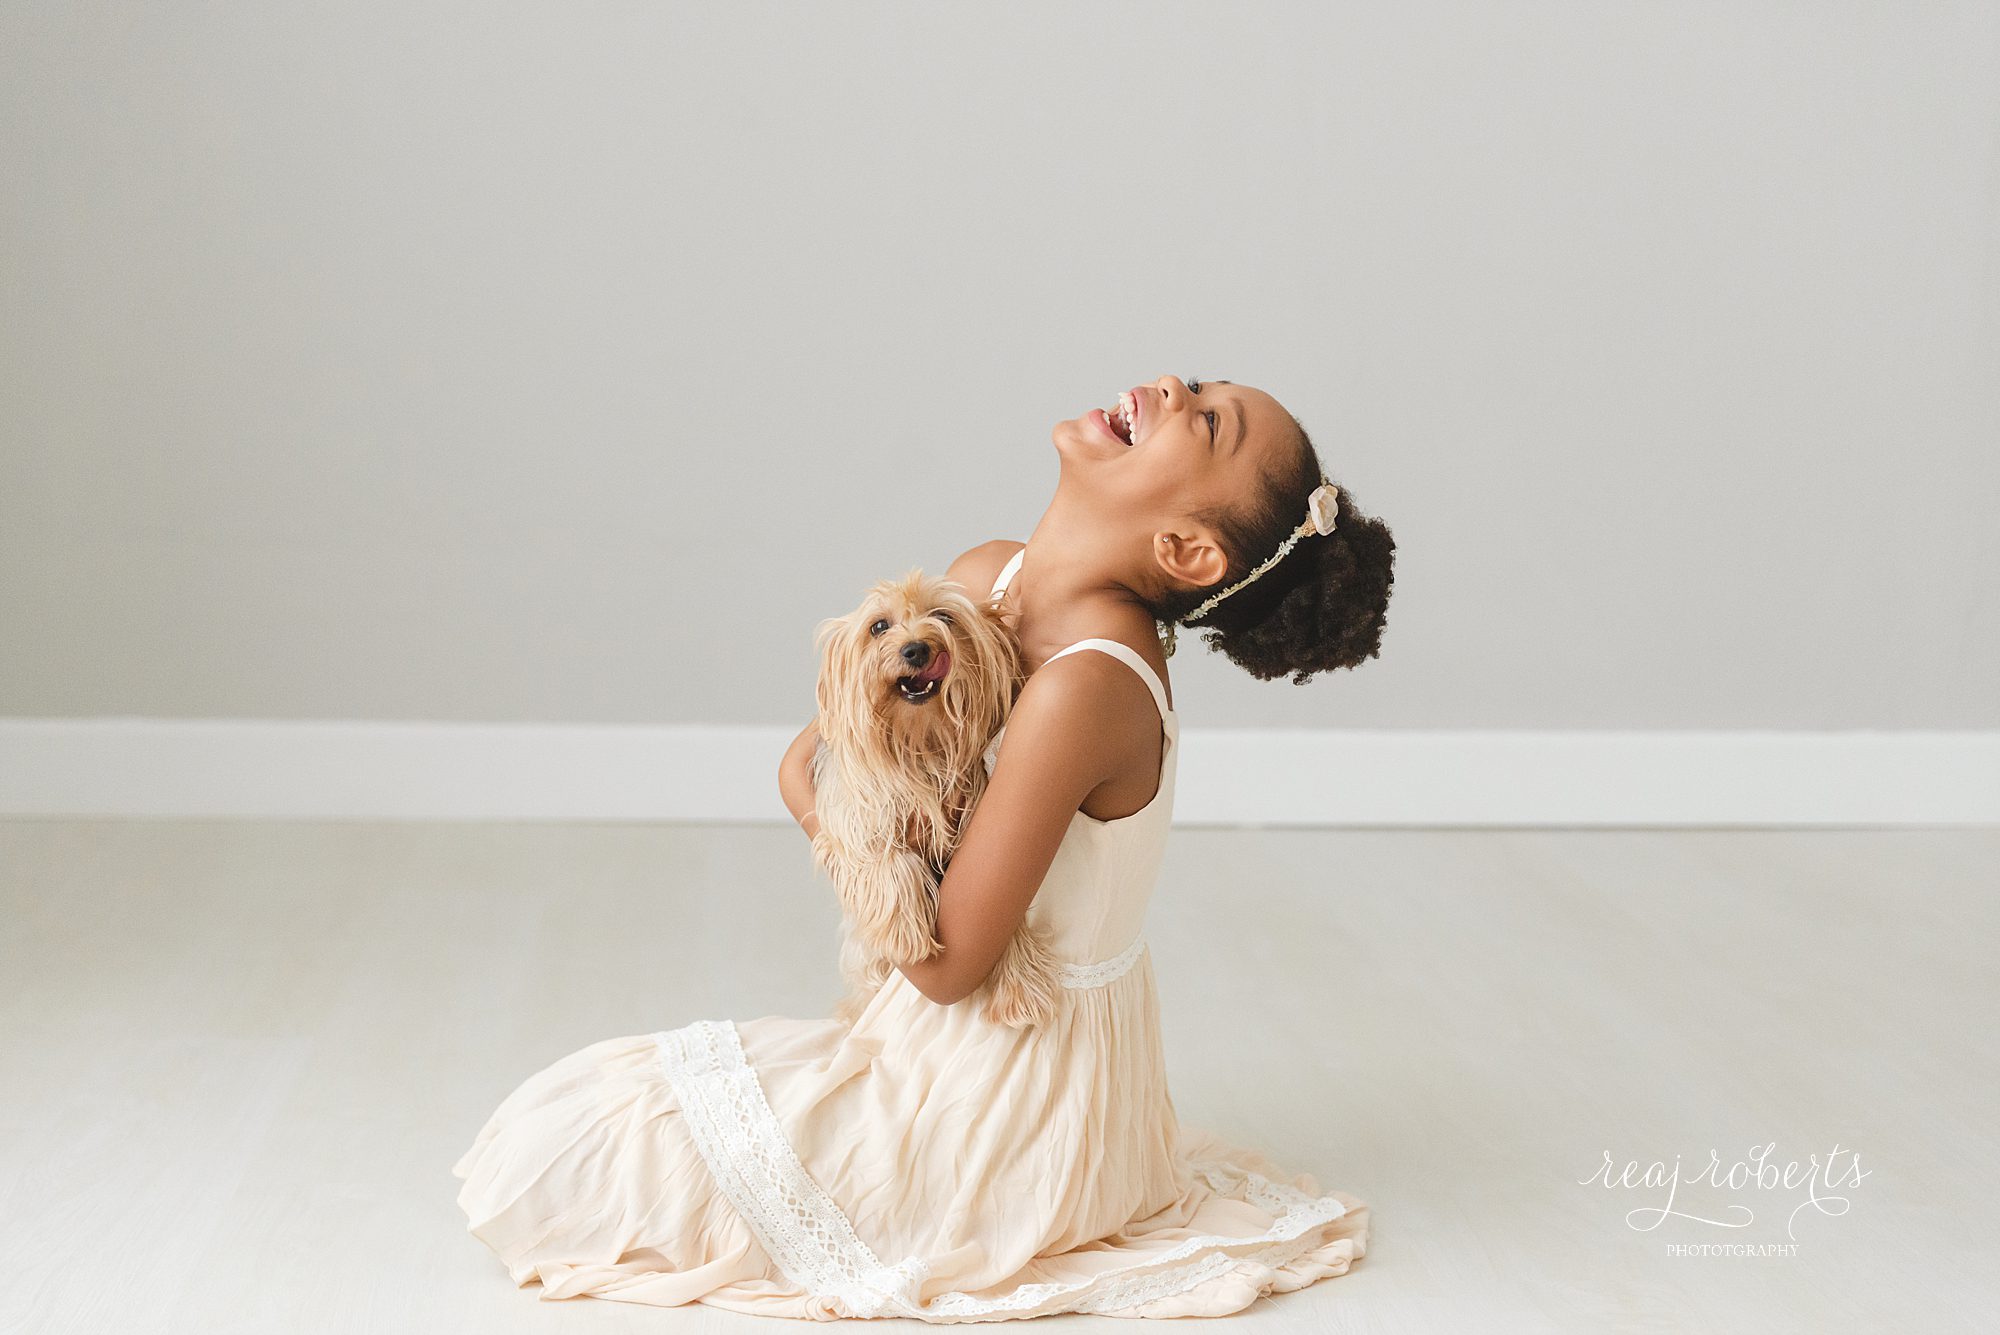 Scottsdale family photographer kids and dogs | Reaj Roberts Photography